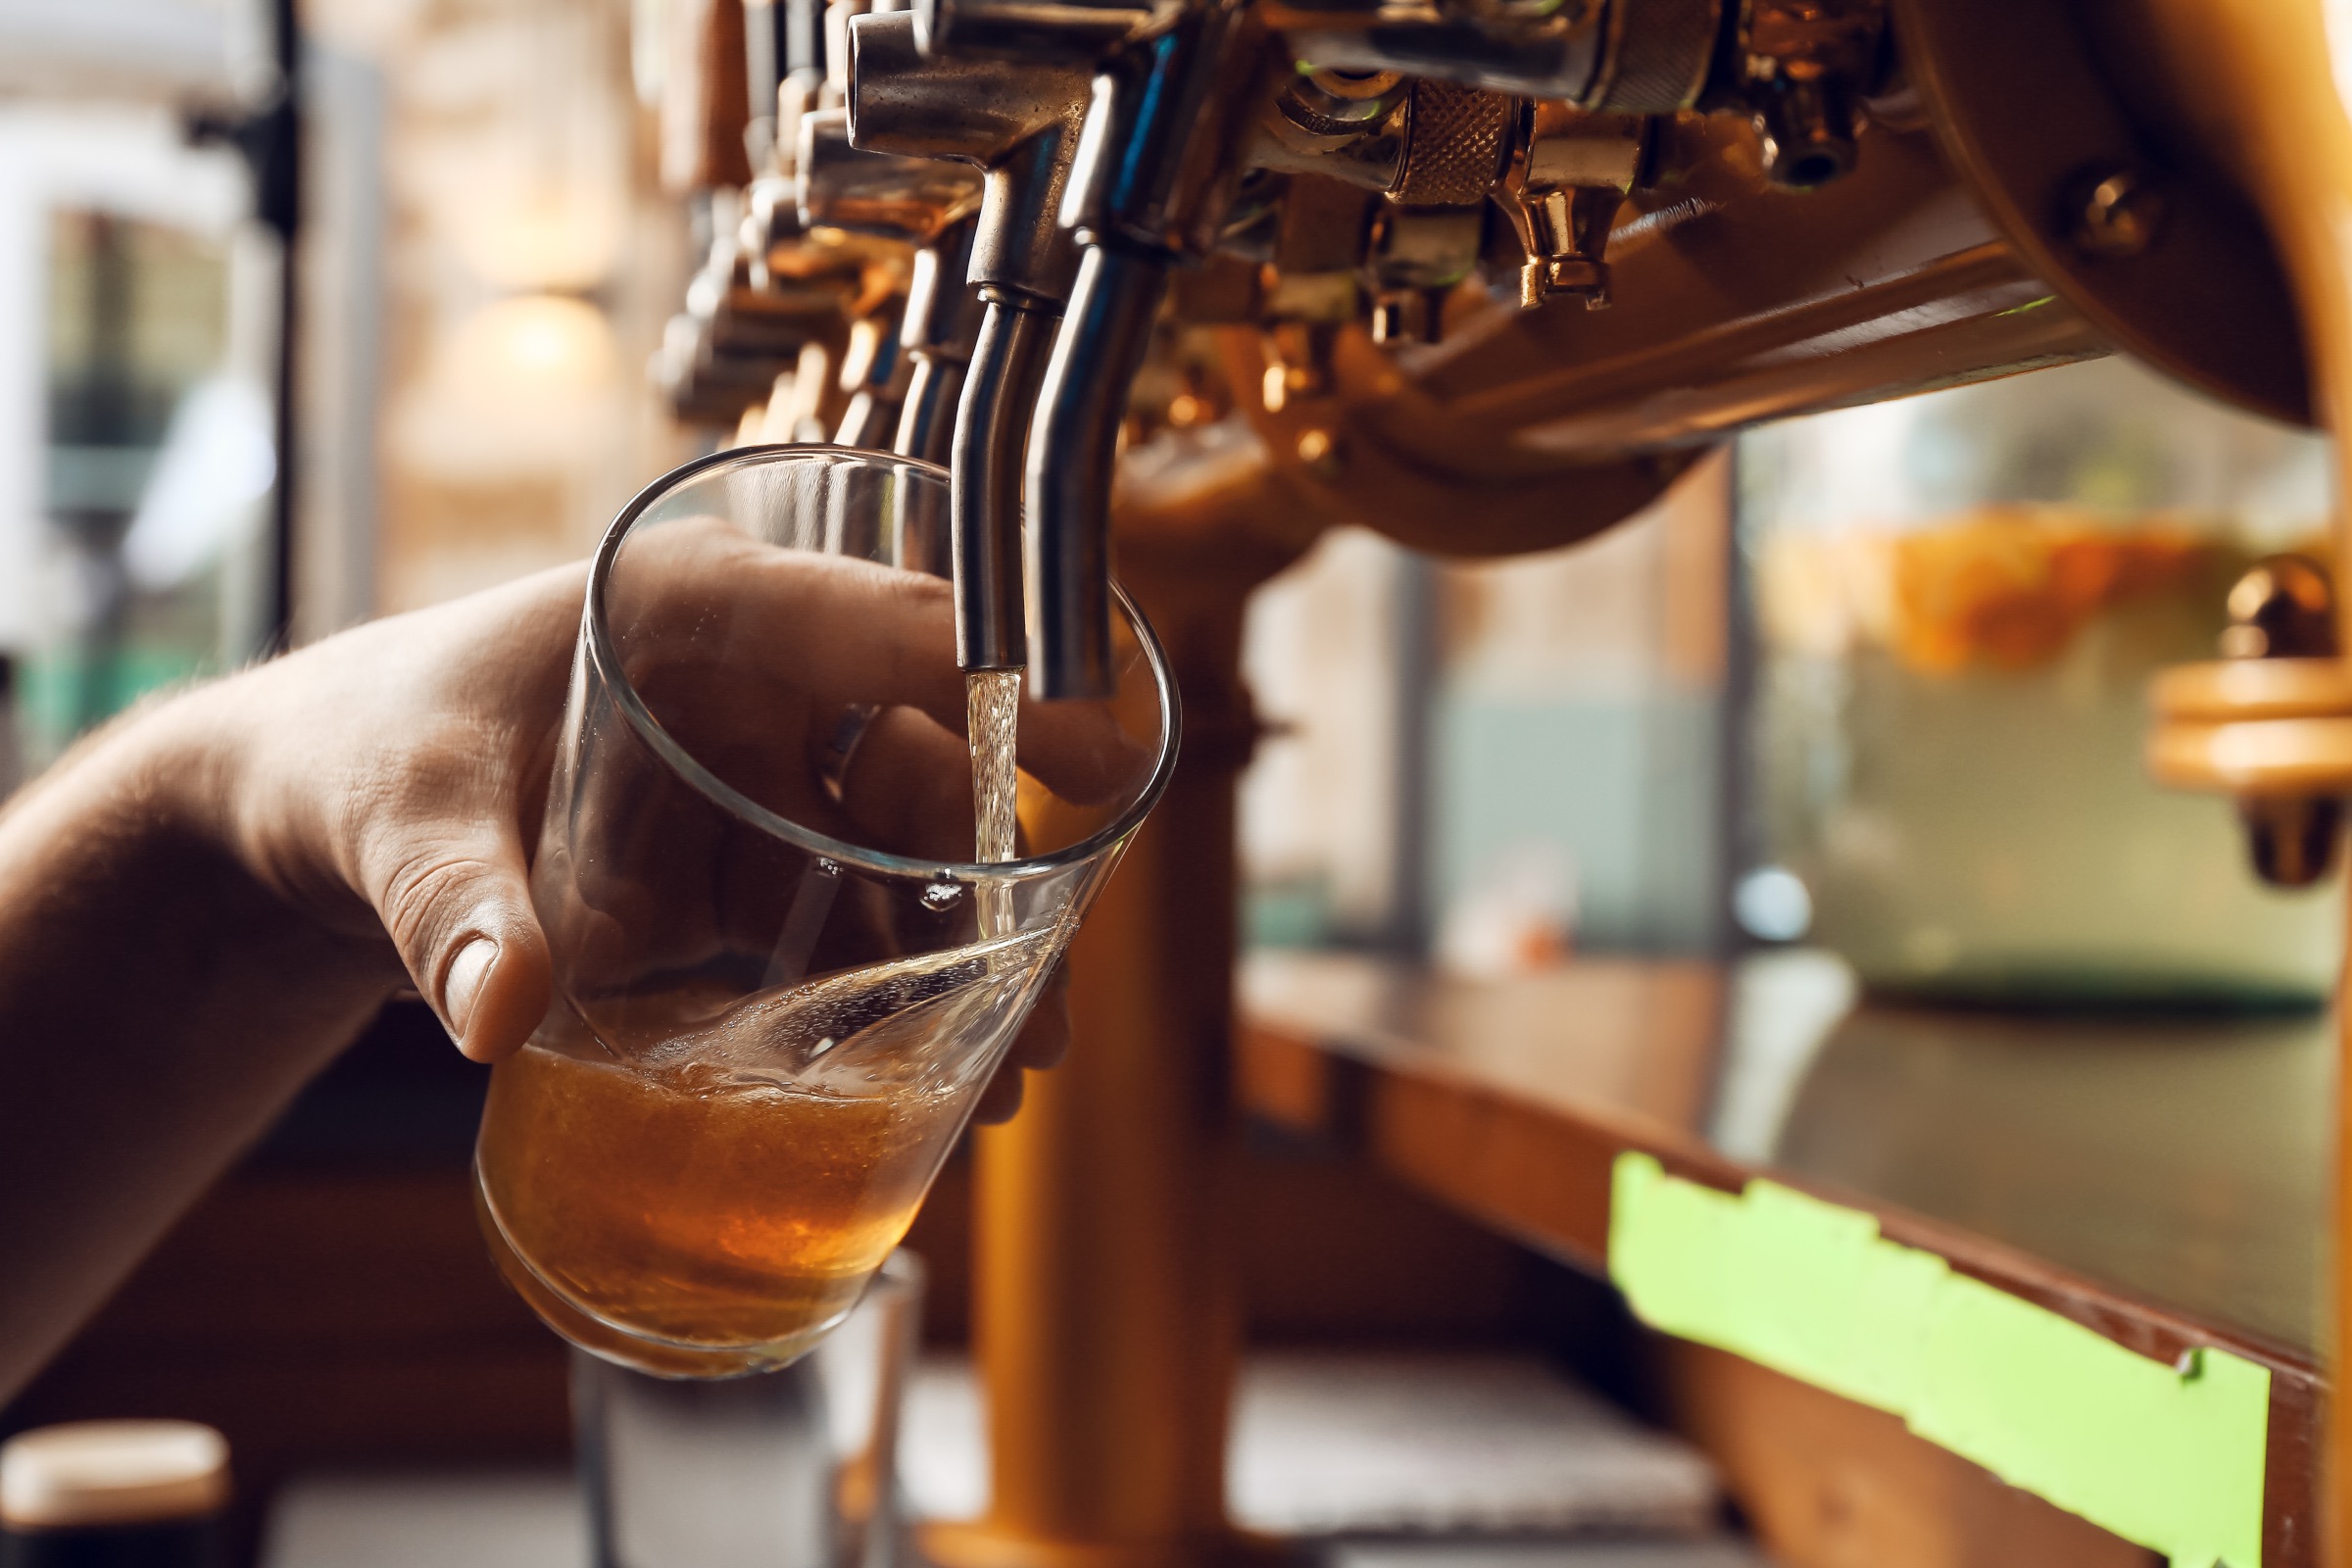 Close up view showing a tap pouring beer into a glass